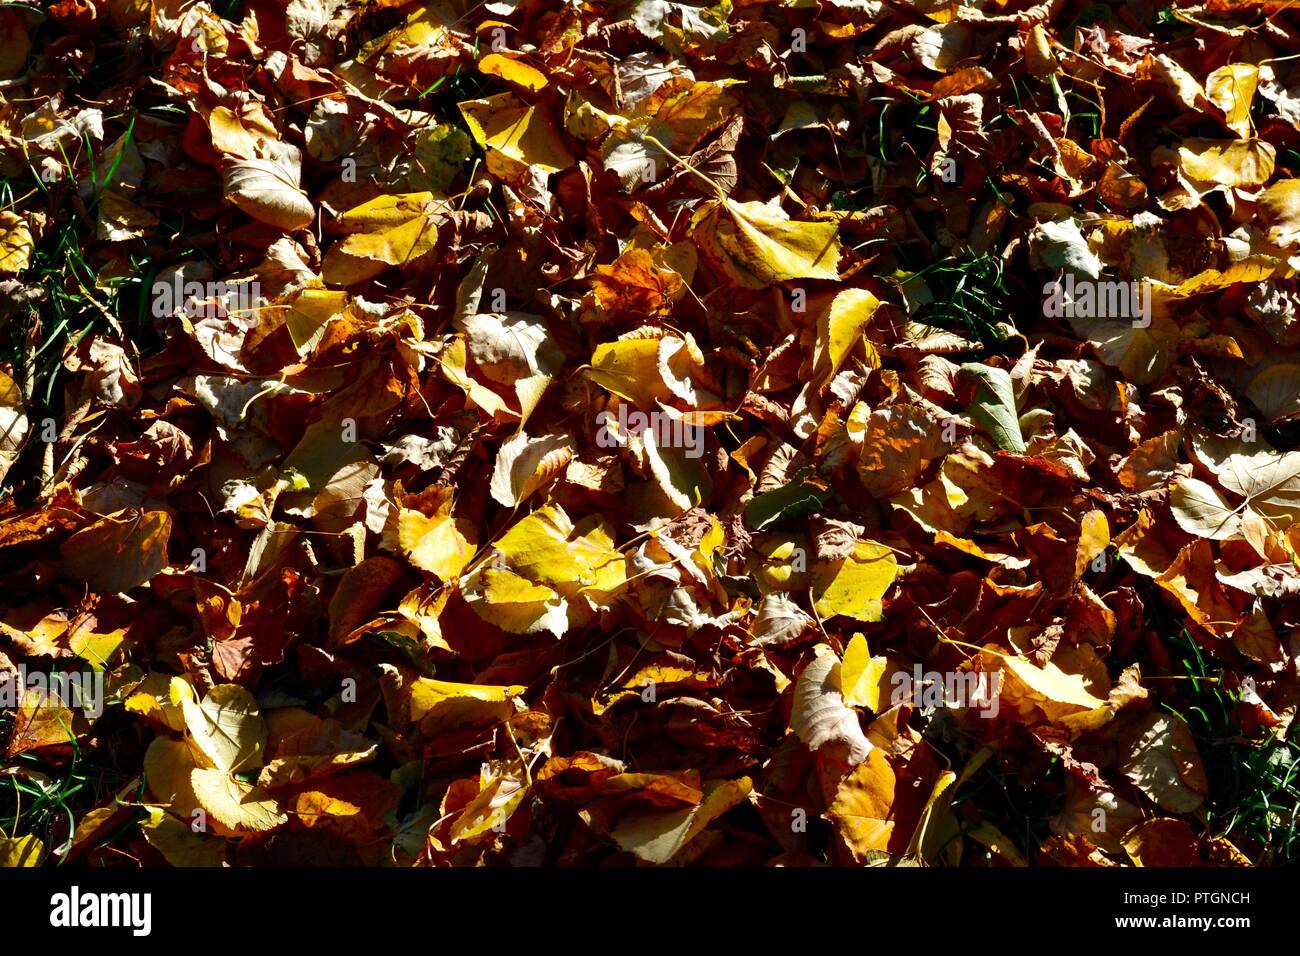 Colourful close-up image of leaves on the ground at the start of Autumn, taken in Norton, Teesside, UK. Stock Photo